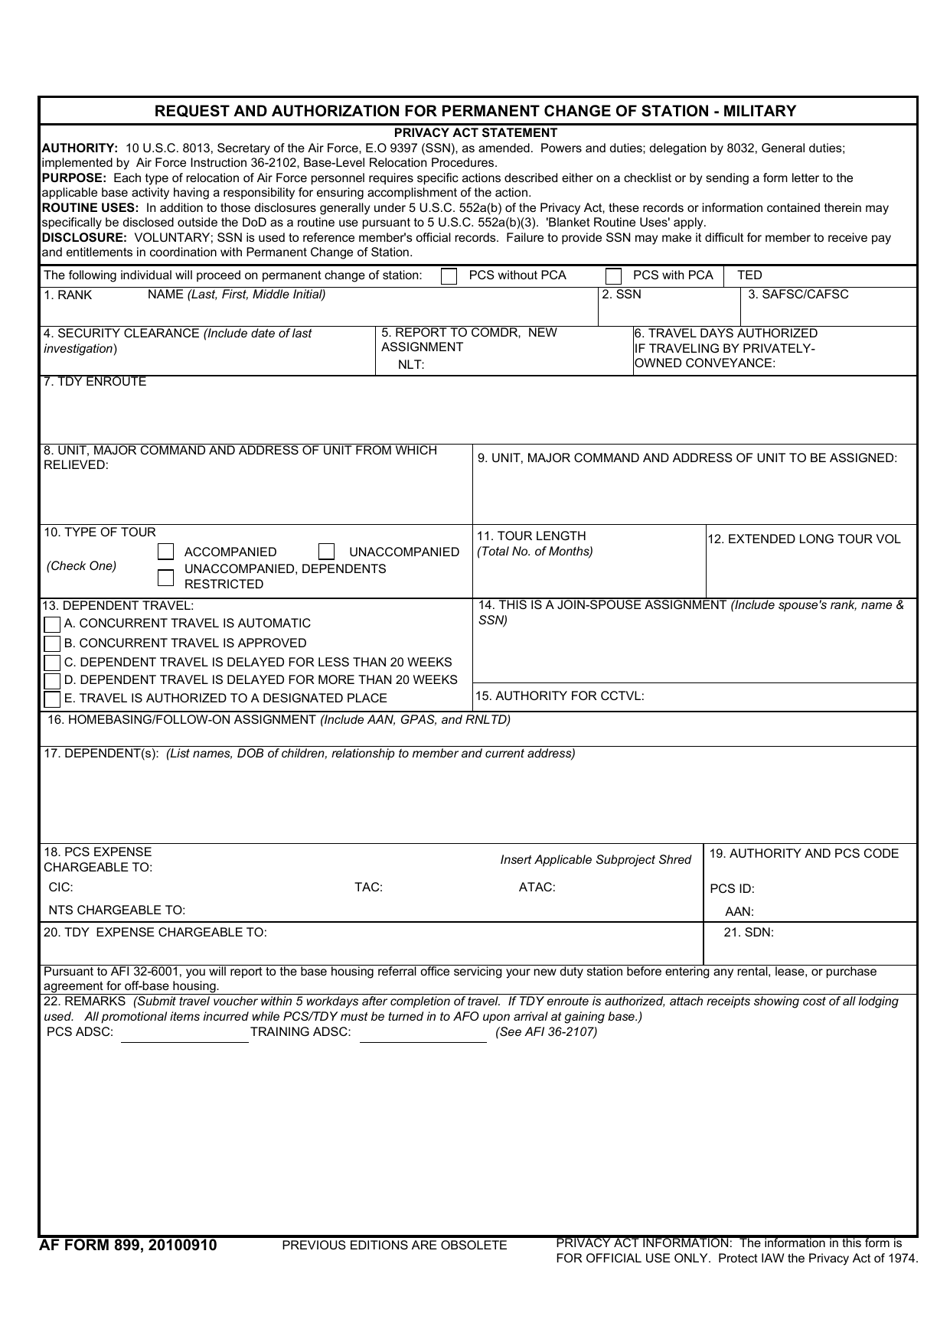 AF Form 899 Request and Authorization for Permanent Change of Station - Military, Page 1